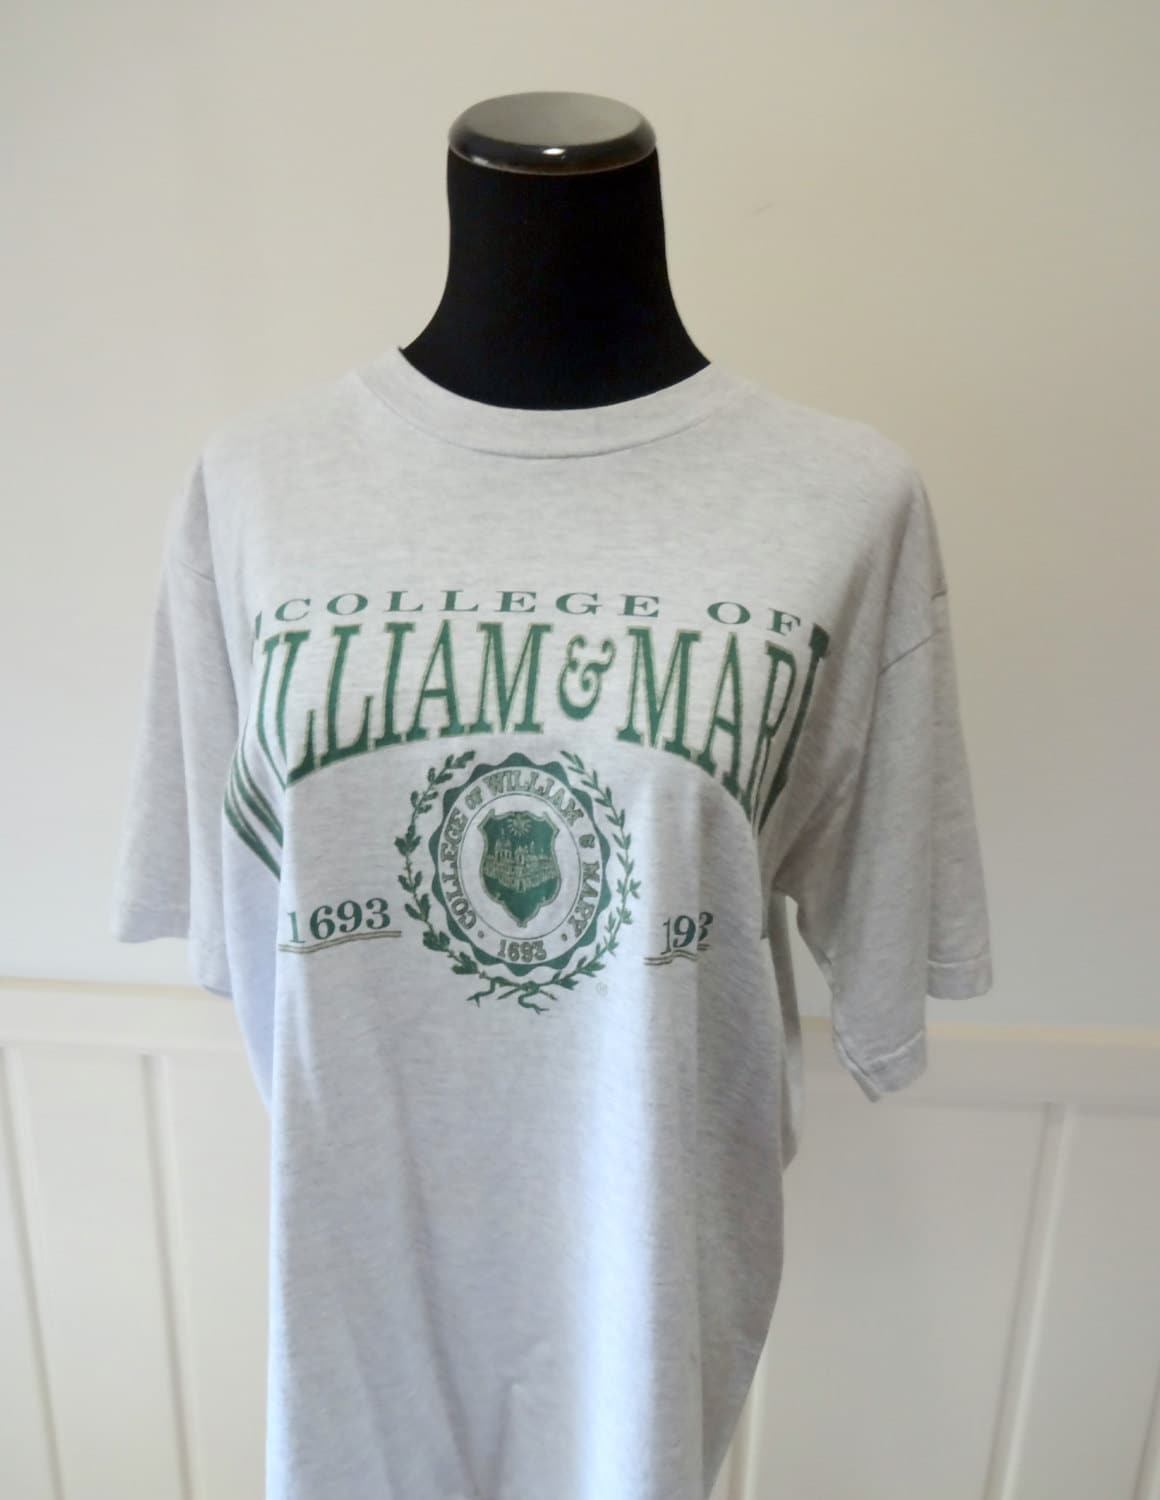 Vintage College of William and Mary Cotton T-Shirt 1993